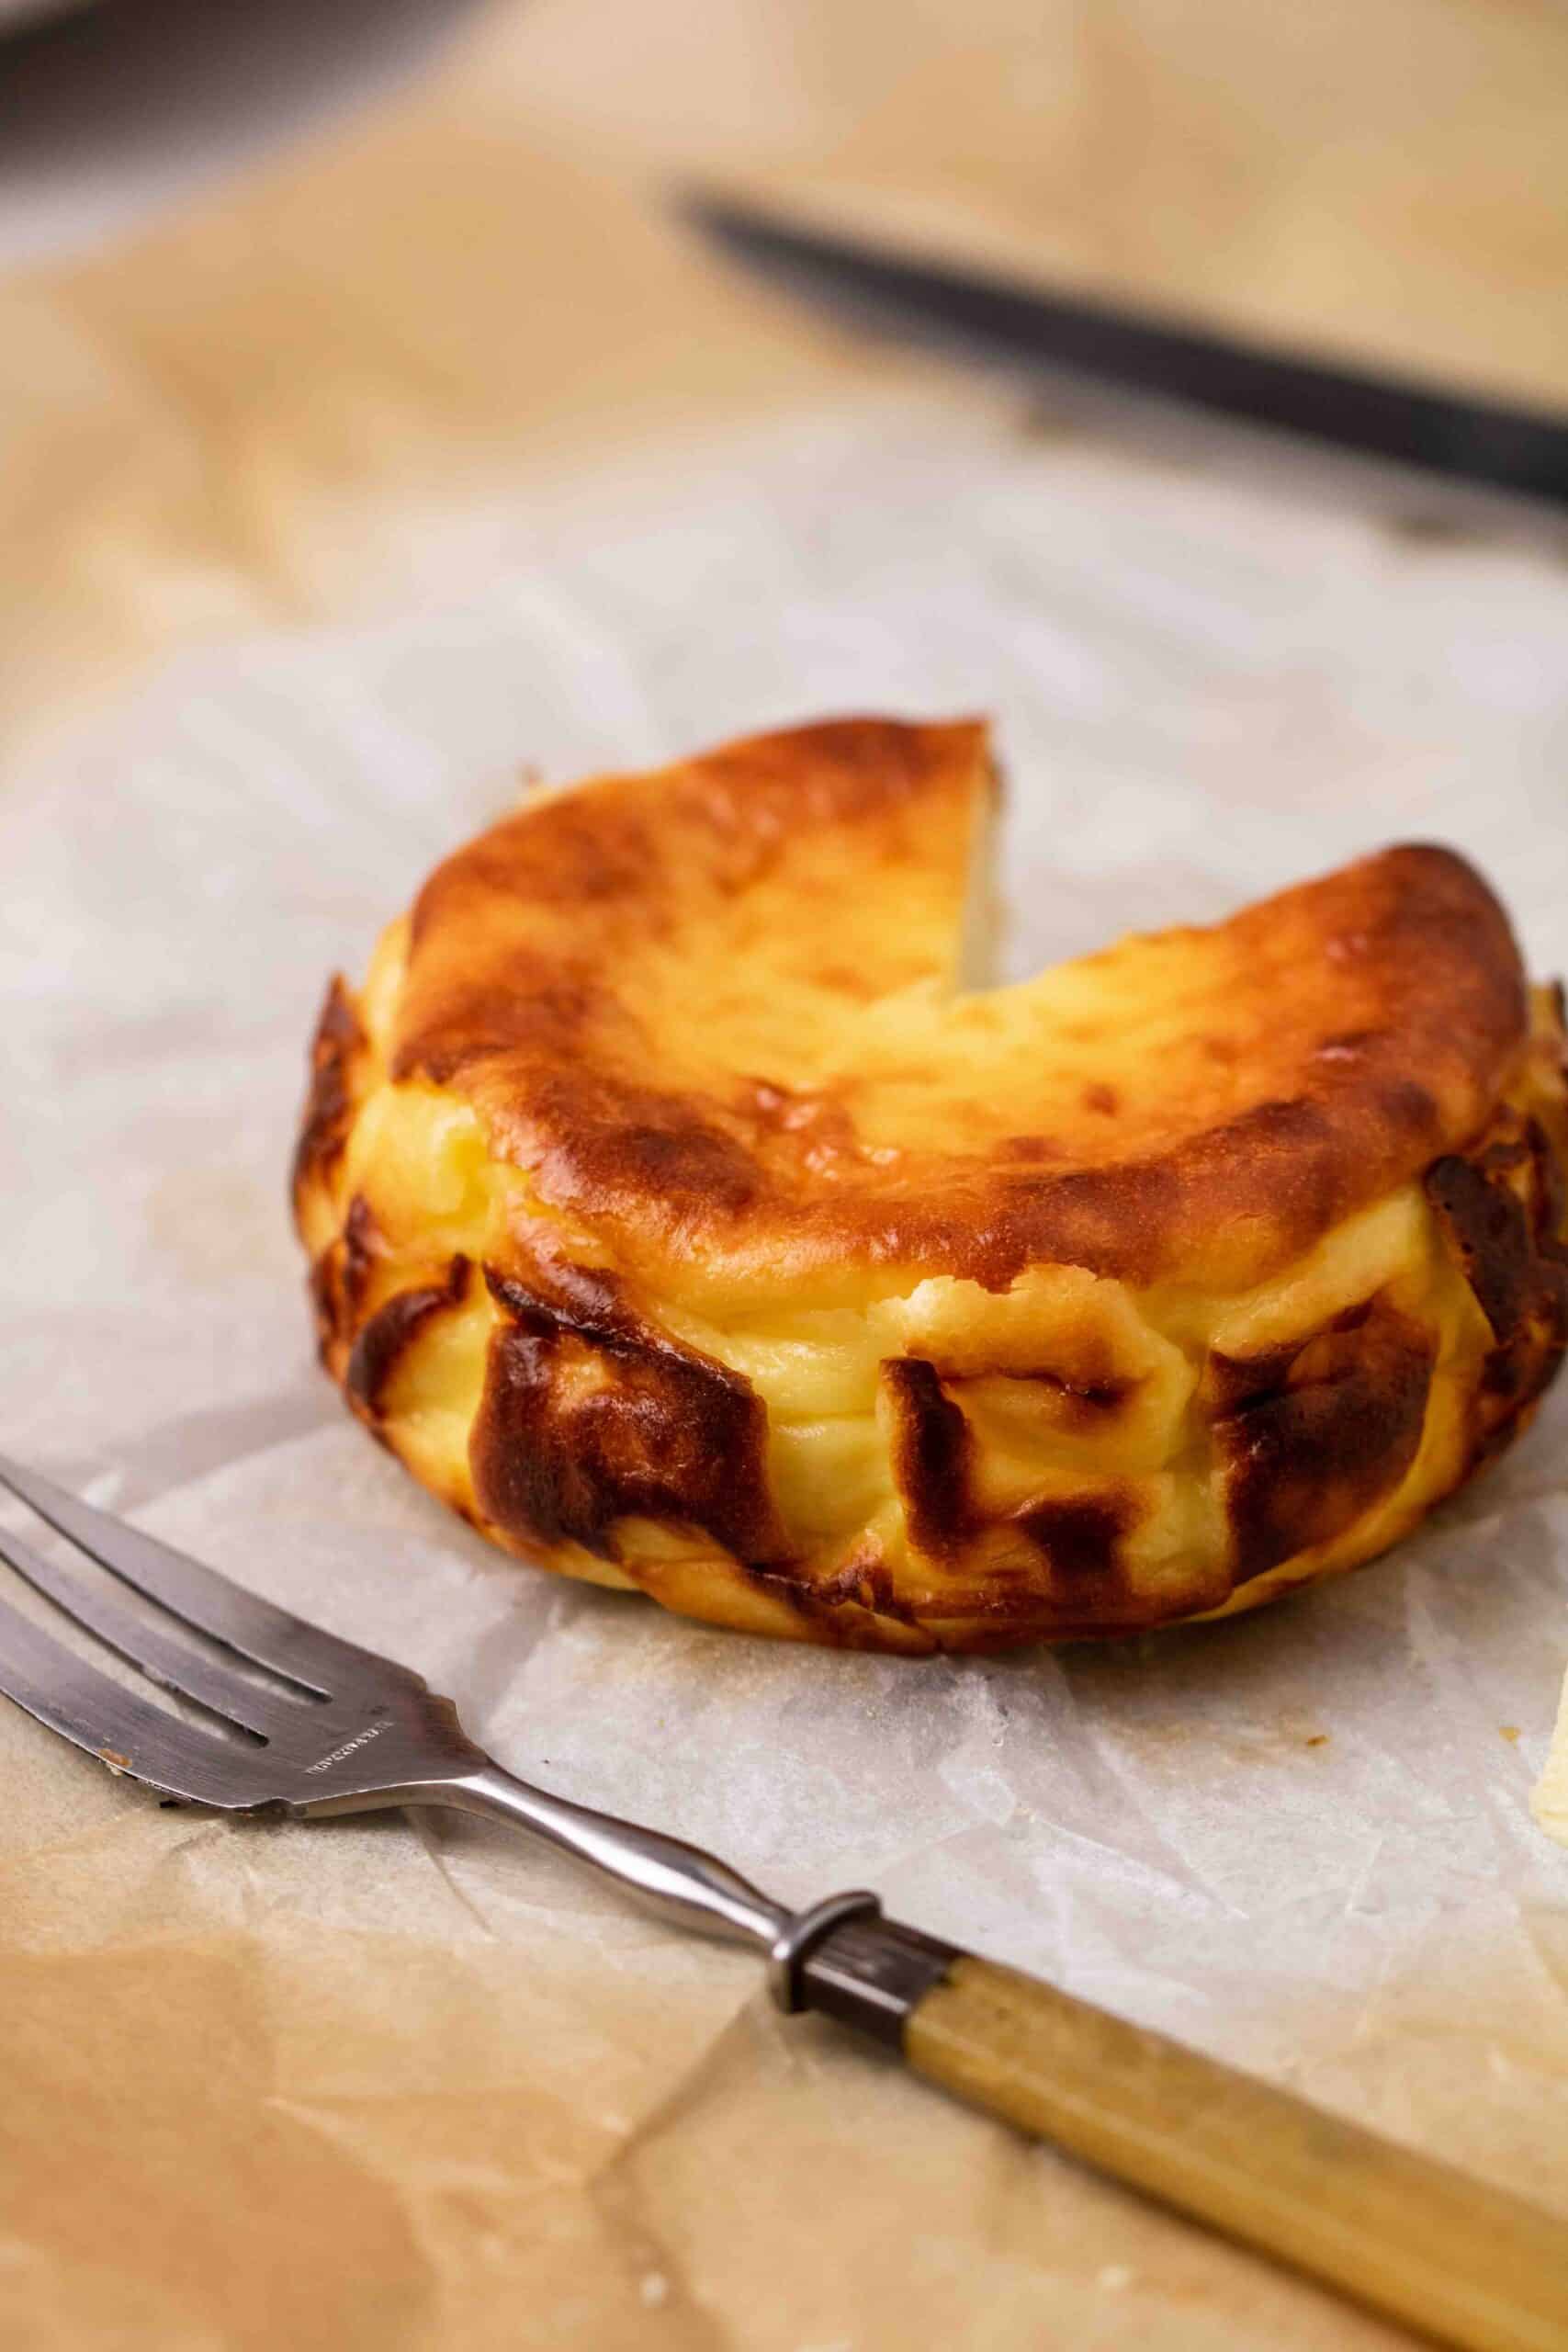 https://lifestyleofafoodie.com/wp-content/uploads/2021/01/The-Best-4-inch-Small-Burnt-Basque-Cheesecake-for-Two-One-23-of-24-scaled.jpg